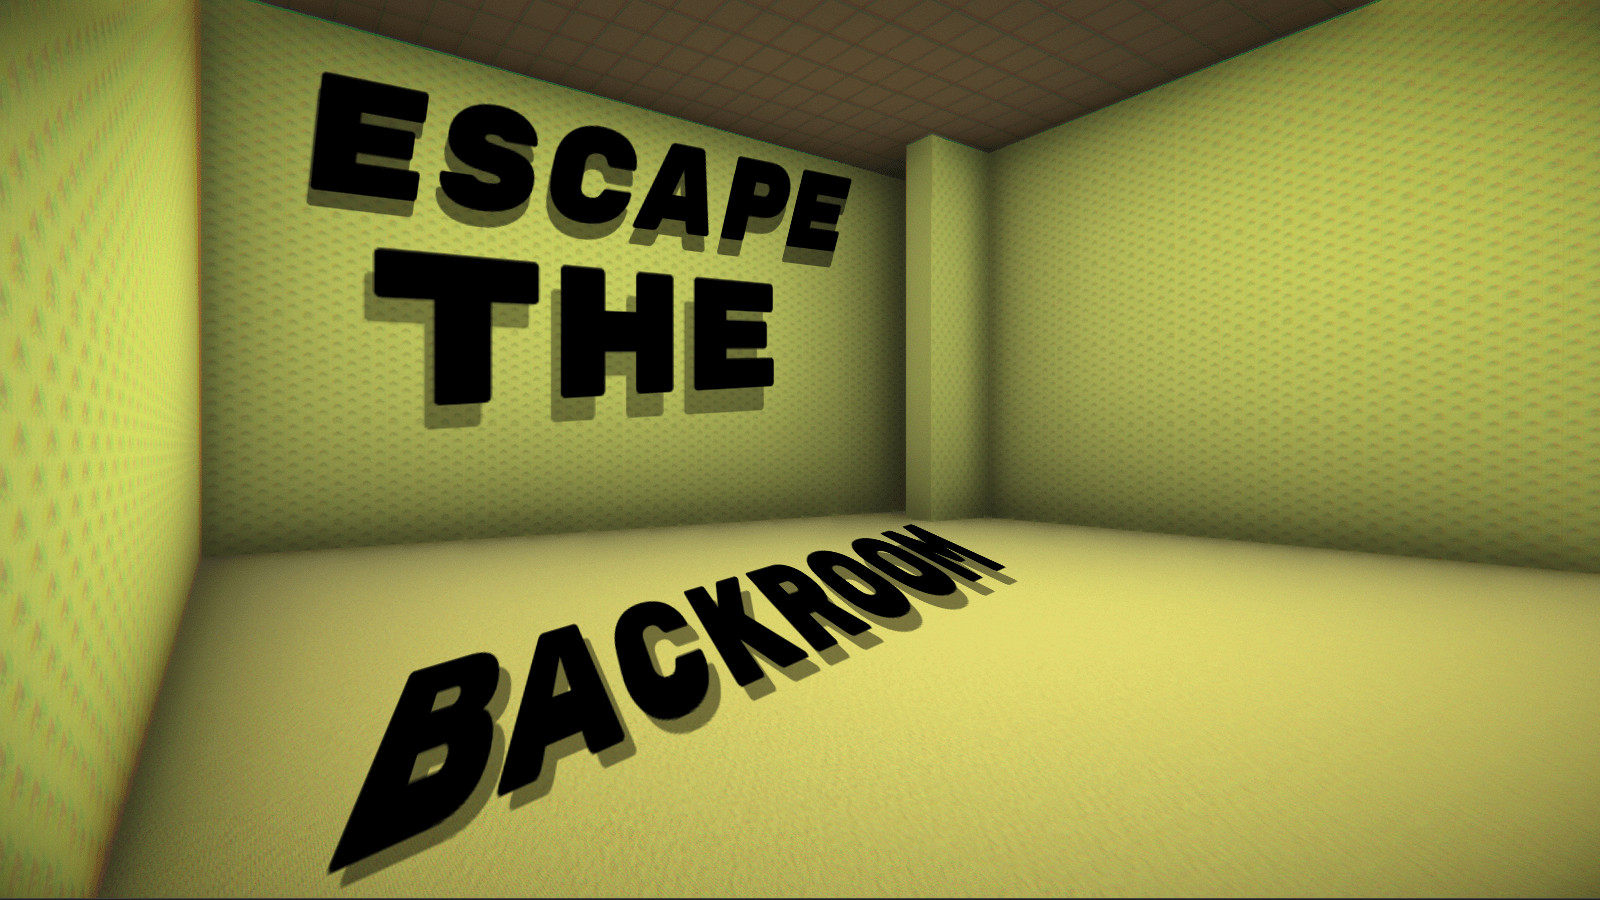 I Escaped The Backrooms.. (FULL GAME) 